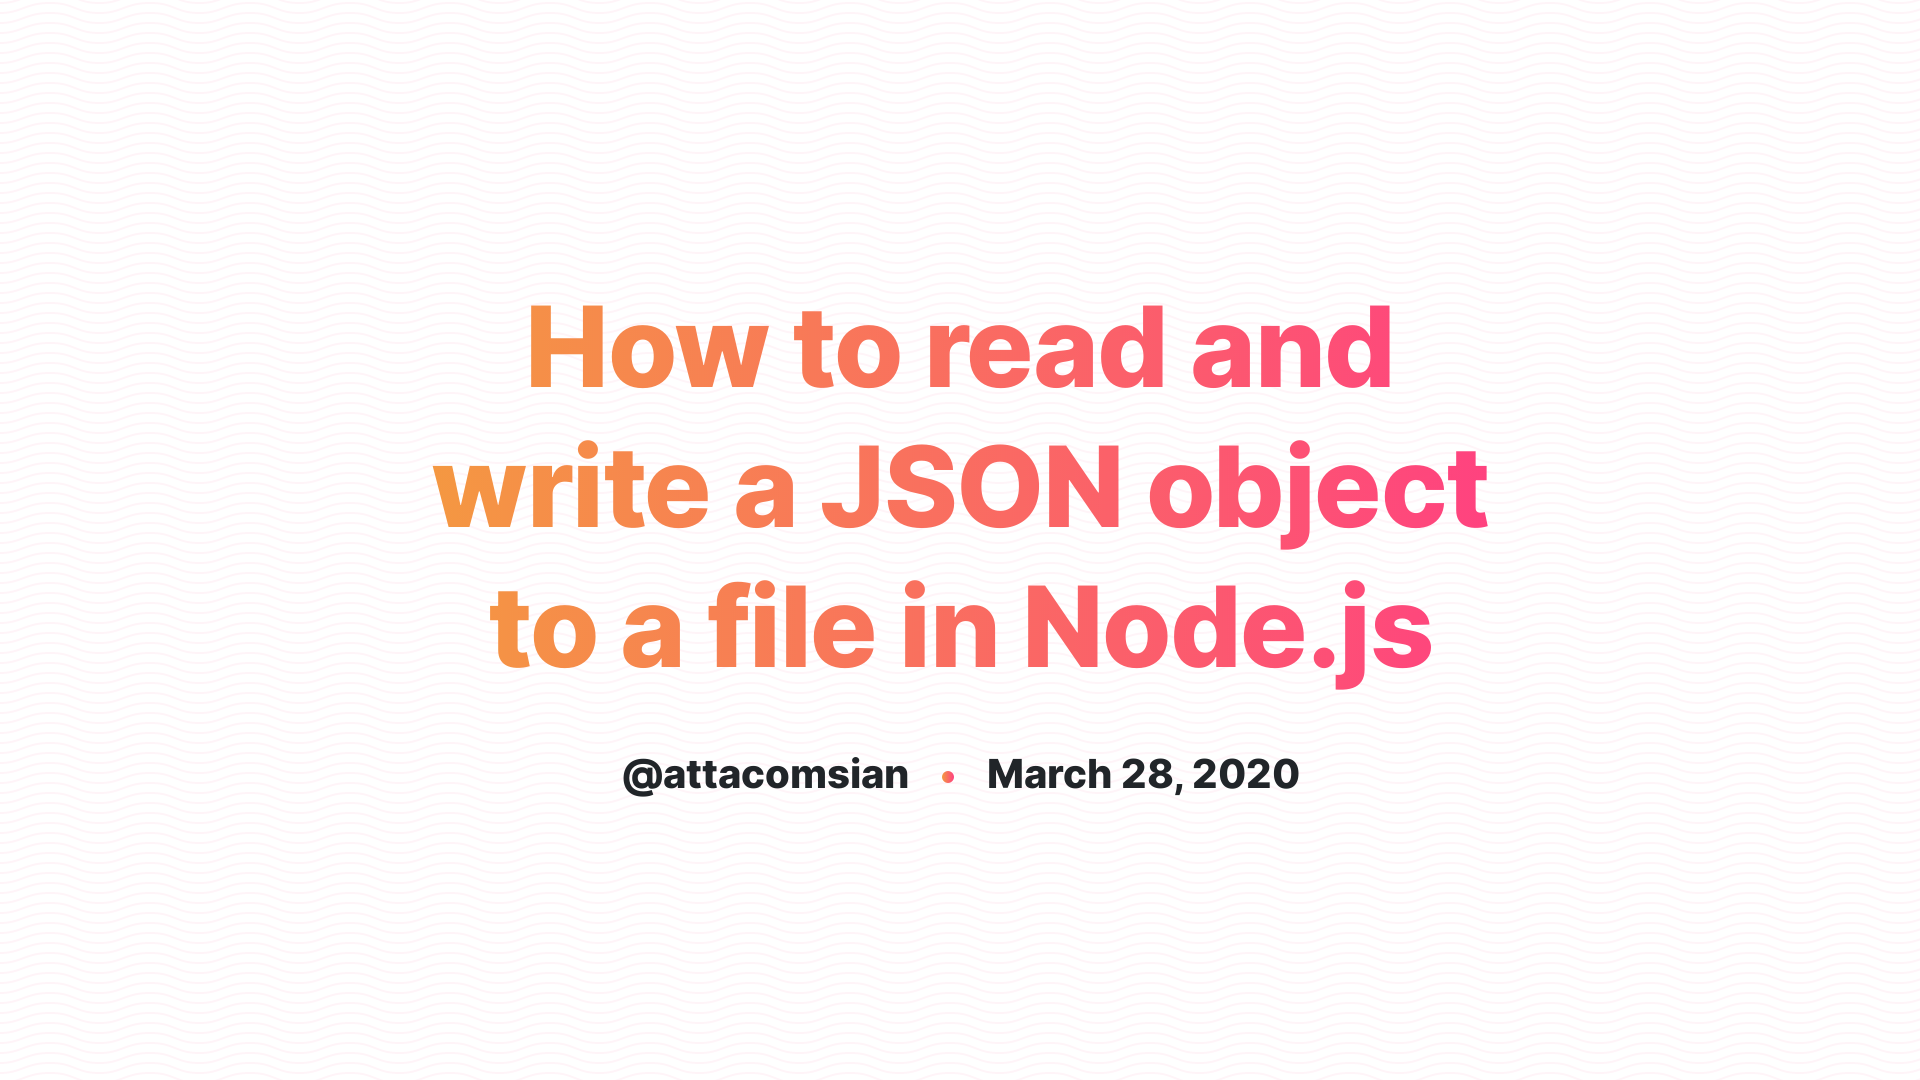 How to read and write a JSON object to a file in Node.js